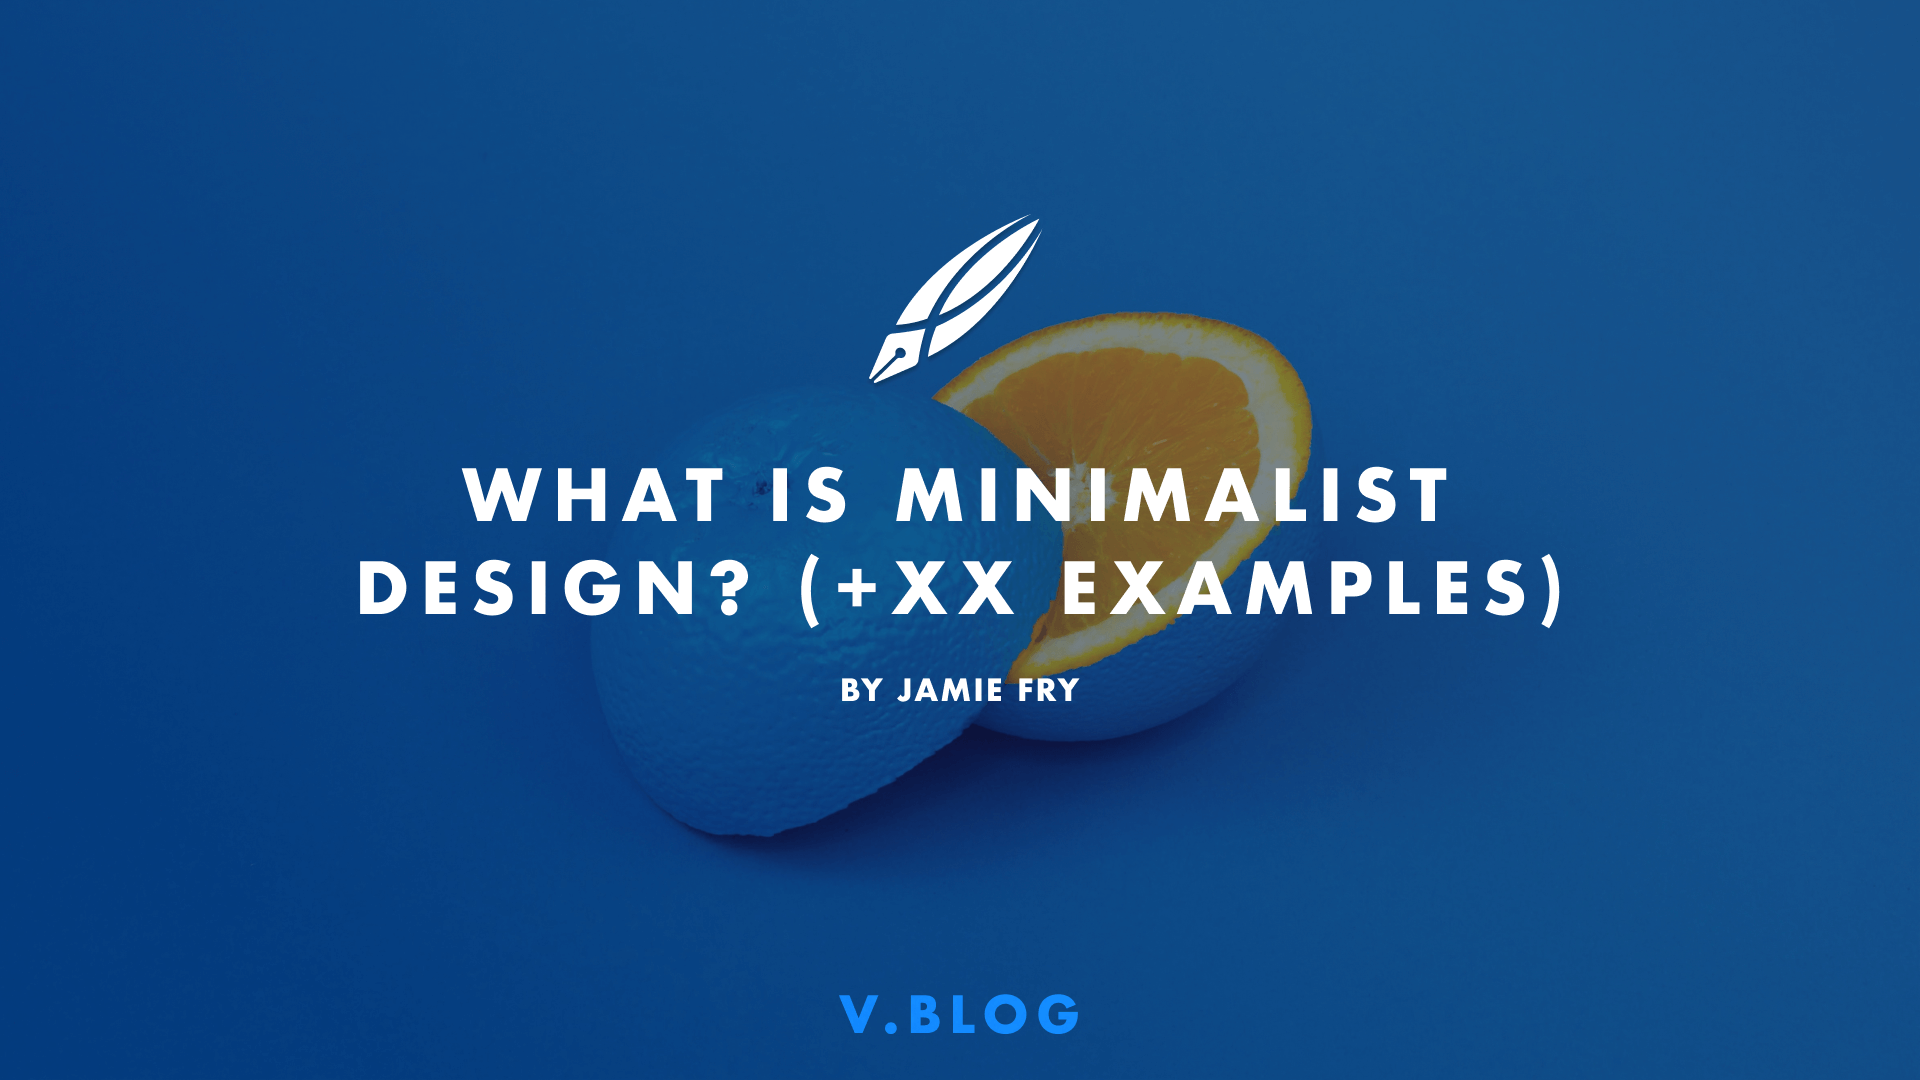 What Is Minimalist Design? Full Guide & Examples